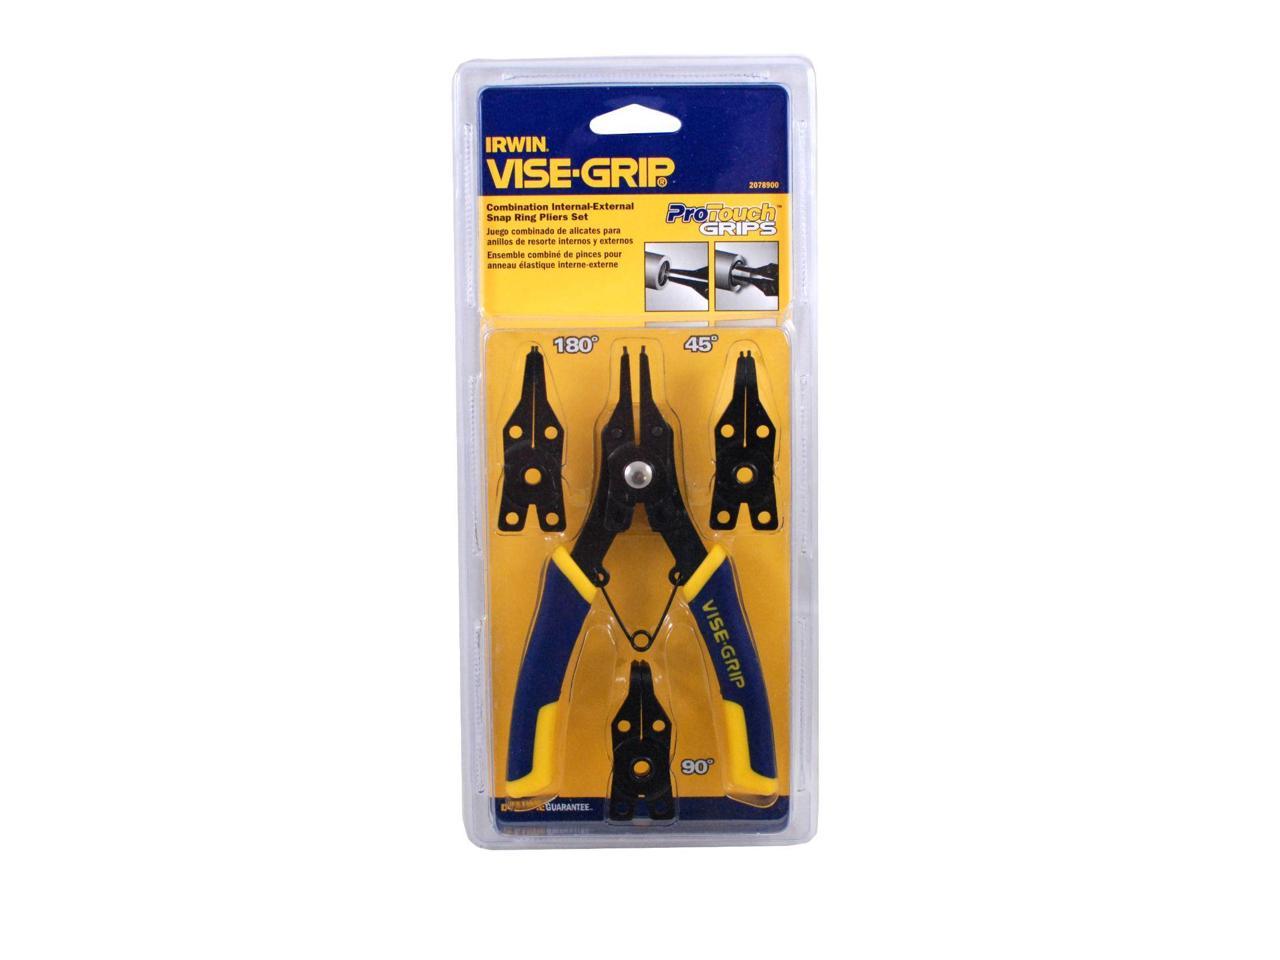 IRWIN Vise-Grip Convertible 6-in Snap Ring Pliers Set ProTouch Power Hand Tools